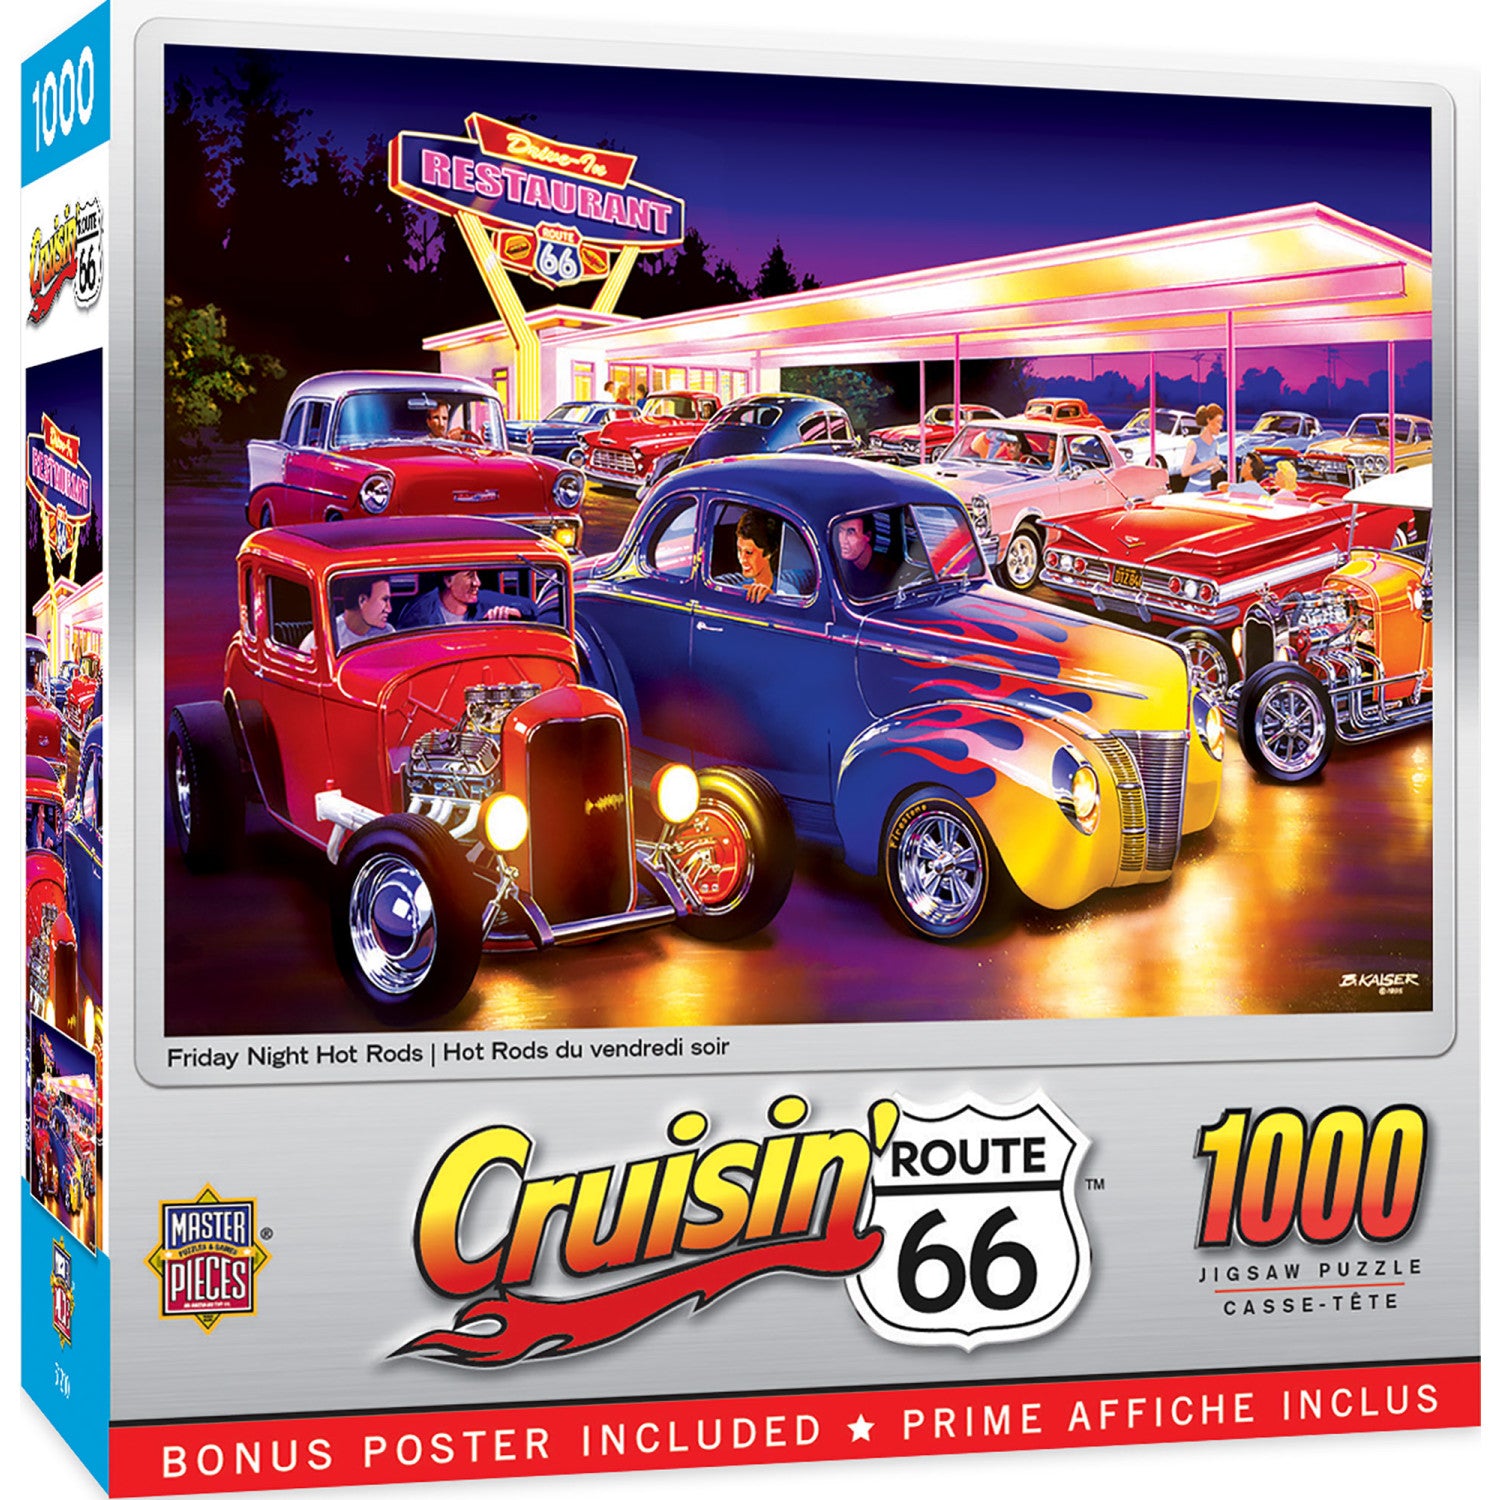 Cruisin' Route 66 - Friday Night Hot Rods 1000 Piece Puzzle